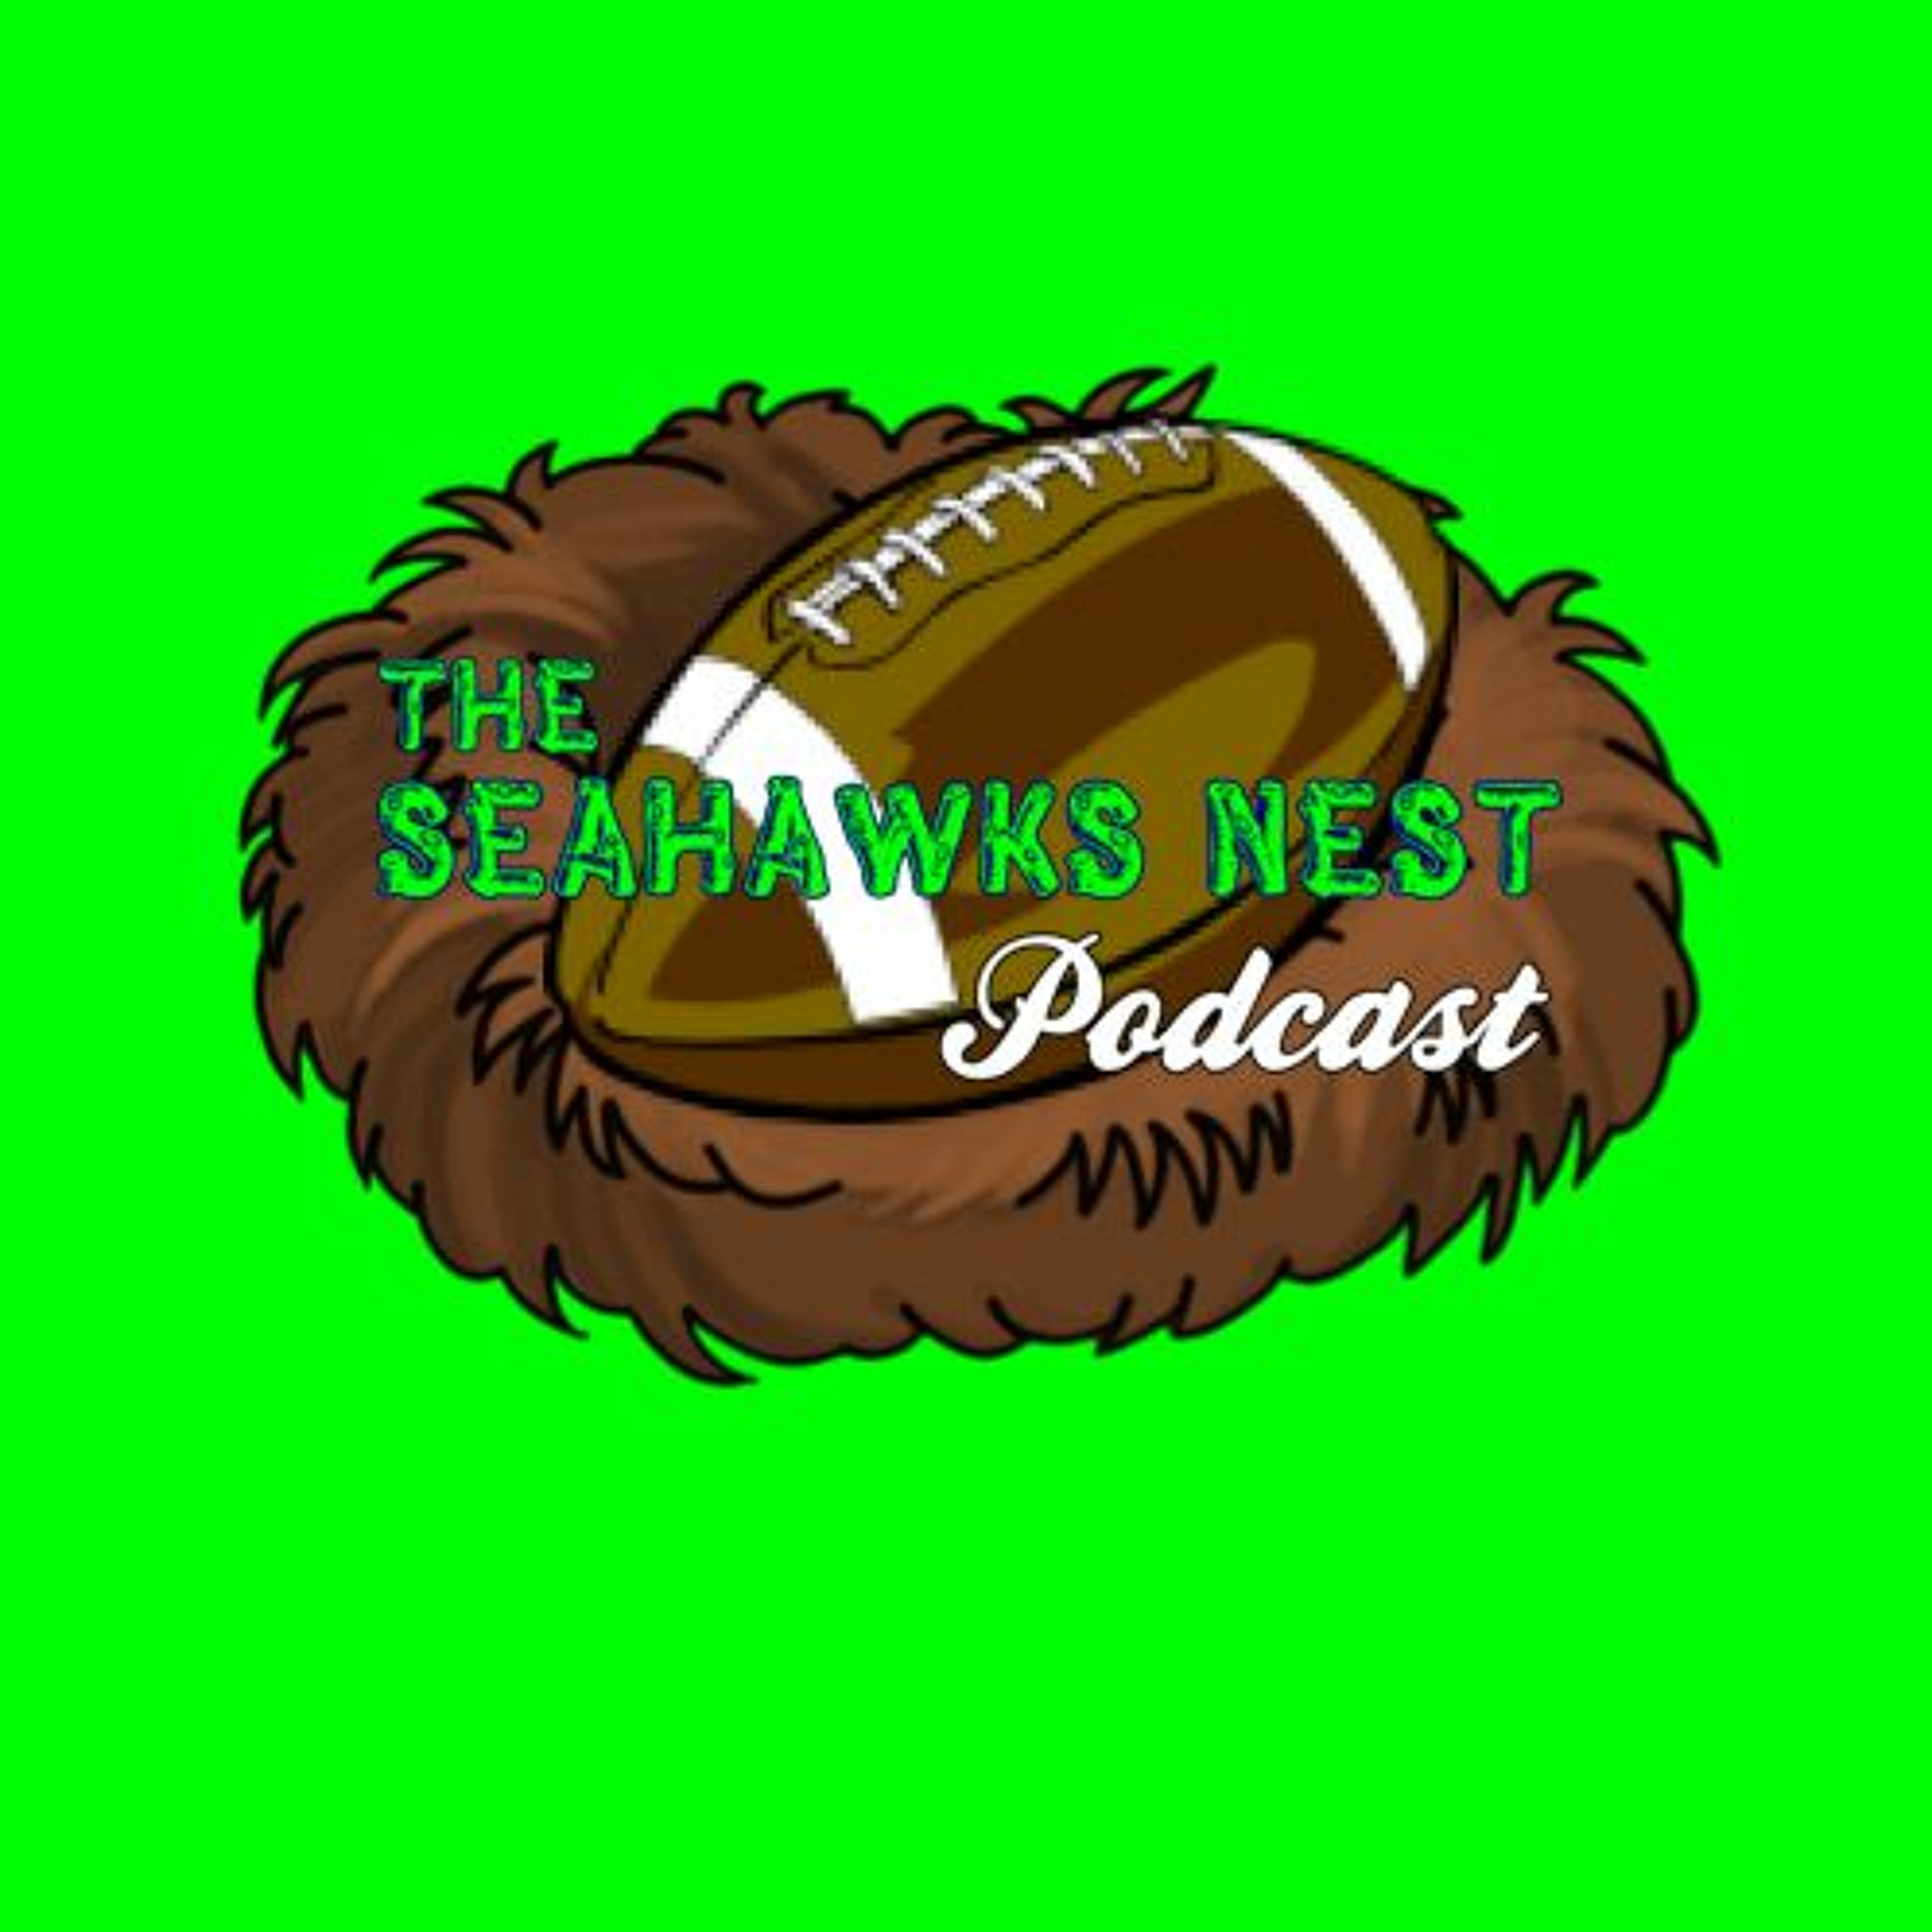 Episode 391 - Seahawks vs the AFC North